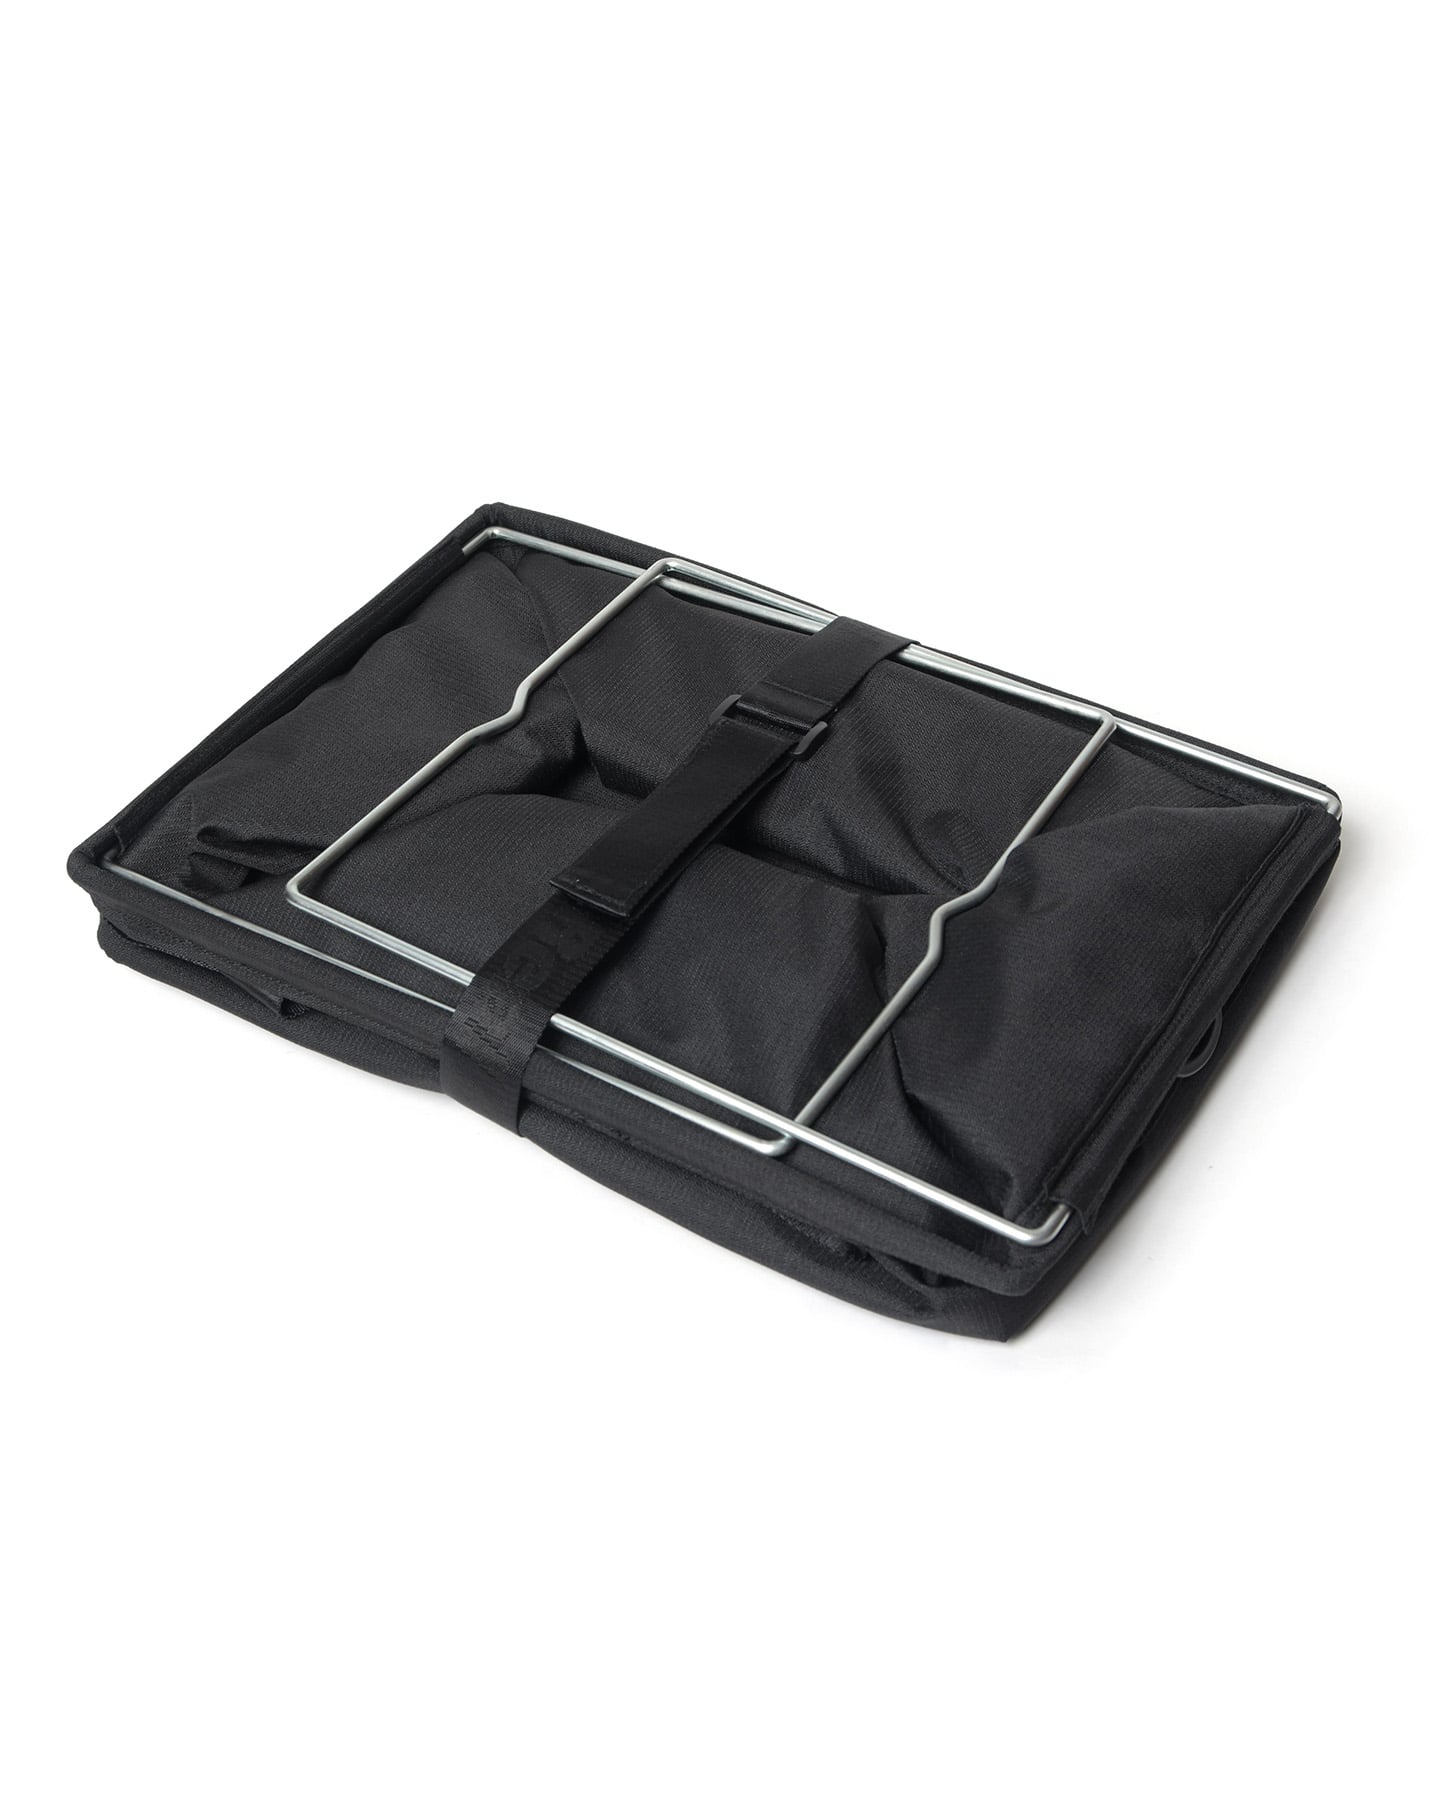 SOPH. | FOLDING STORAGE SOFT CONTAINER(FREE BLACK):